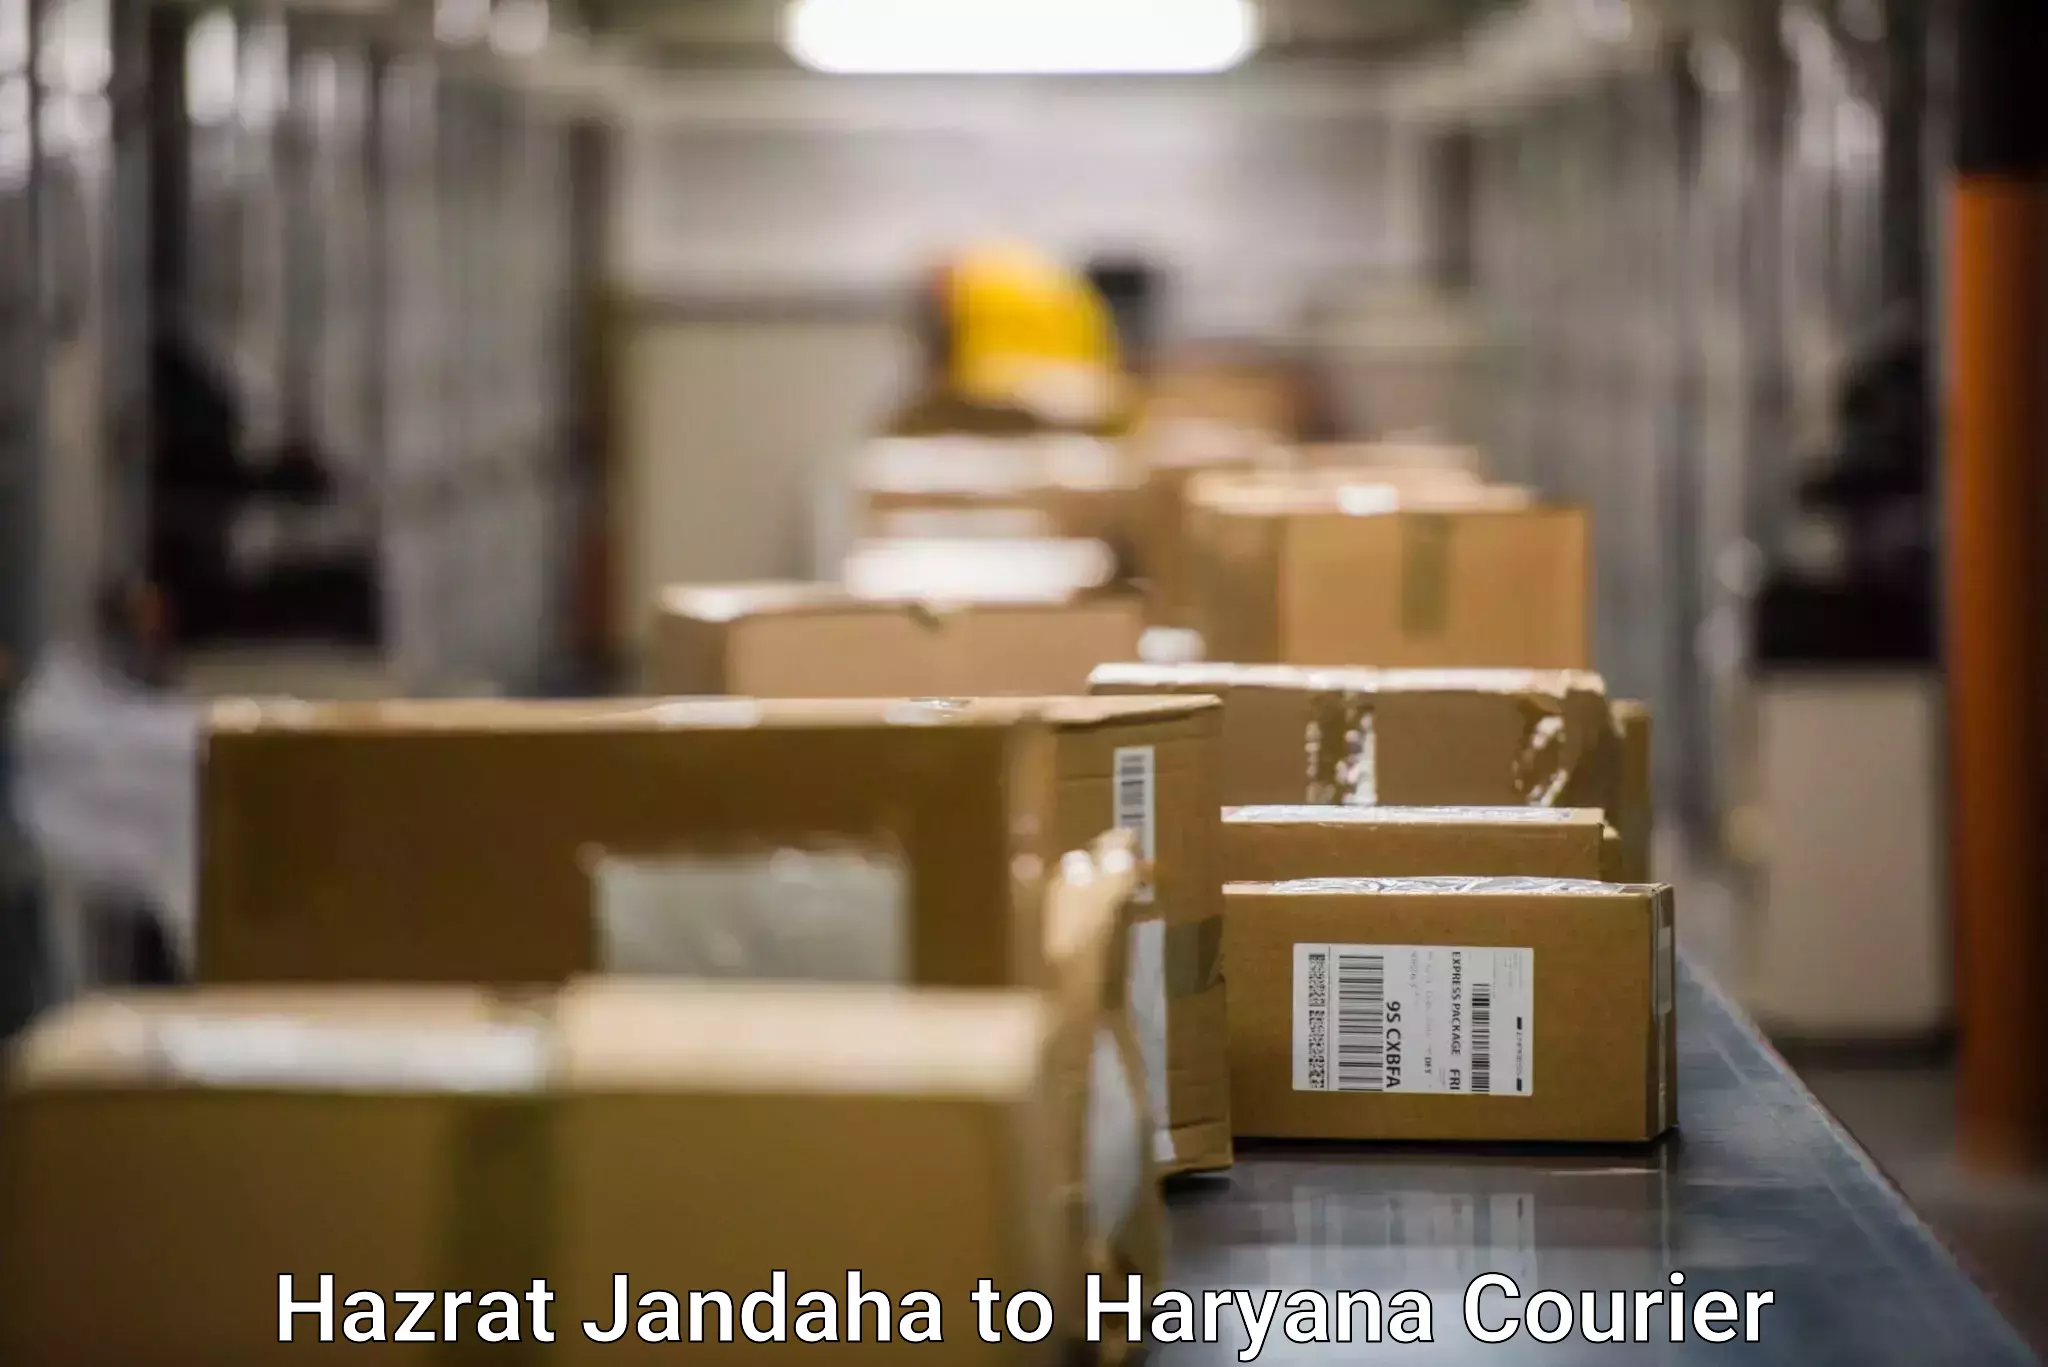 Expedited parcel delivery Hazrat Jandaha to Dharuhera